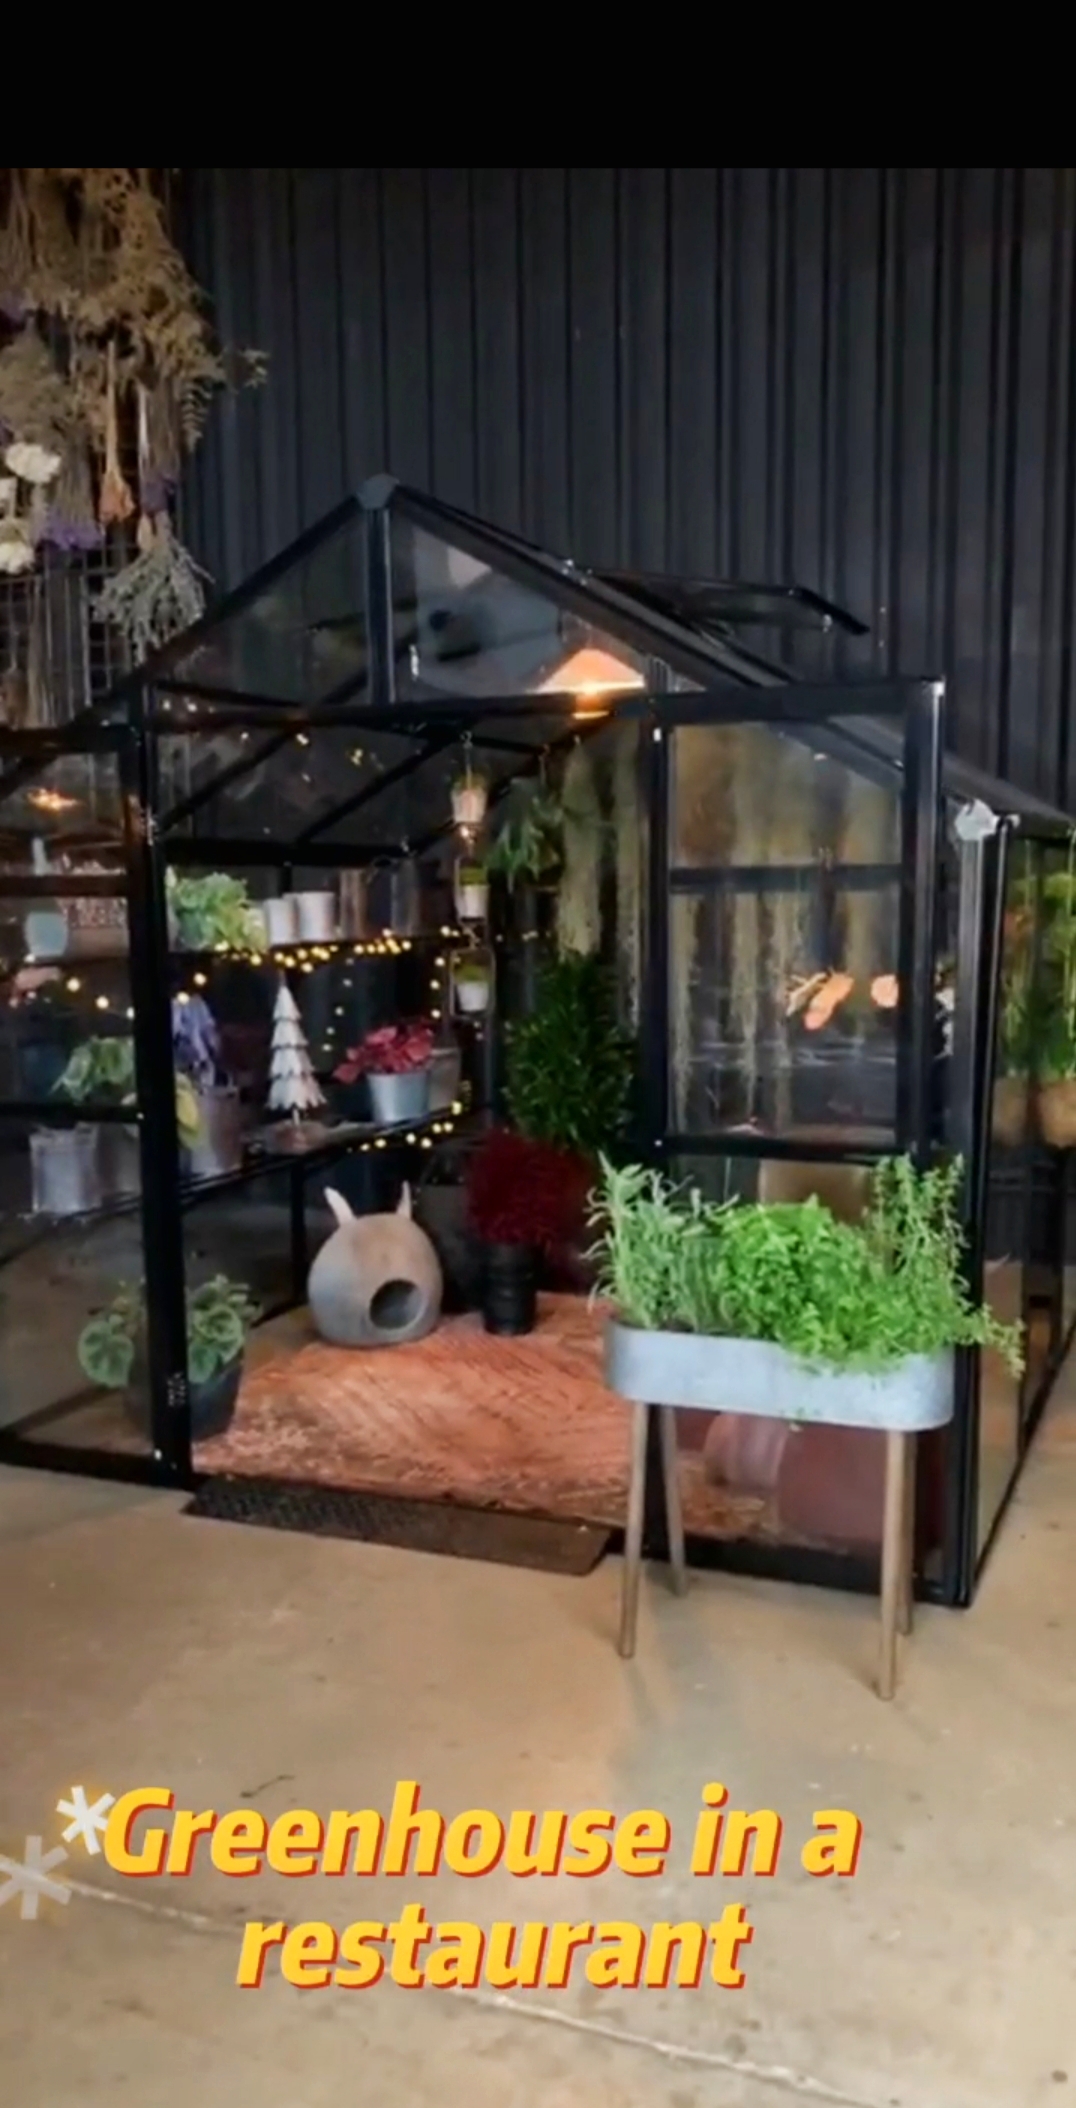 THE GREENHOUSE IN A RESTAURANT